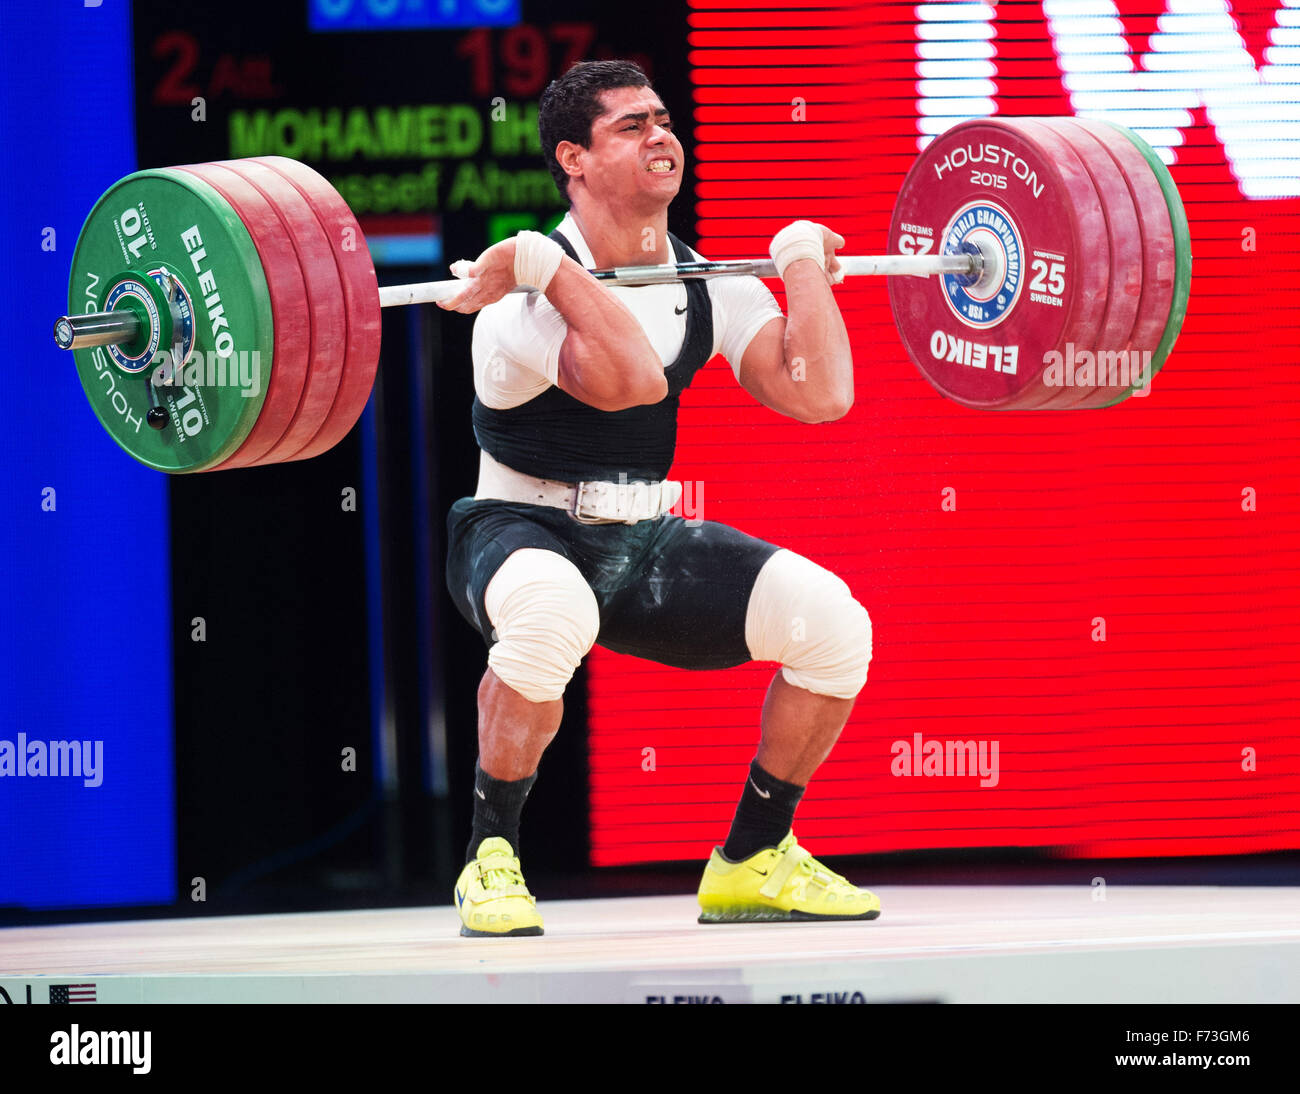 Houston, Texas, USA. 24th Nov, 2015.  Youssef Mohamed Ihab lifts 197 kilograms in the clean and jerk. Ihab competed in the Men's 77 kilogram weight class at the World Weightlifting Championships in Houston, Texas. Brent Clark/Alamy Live News Stock Photo